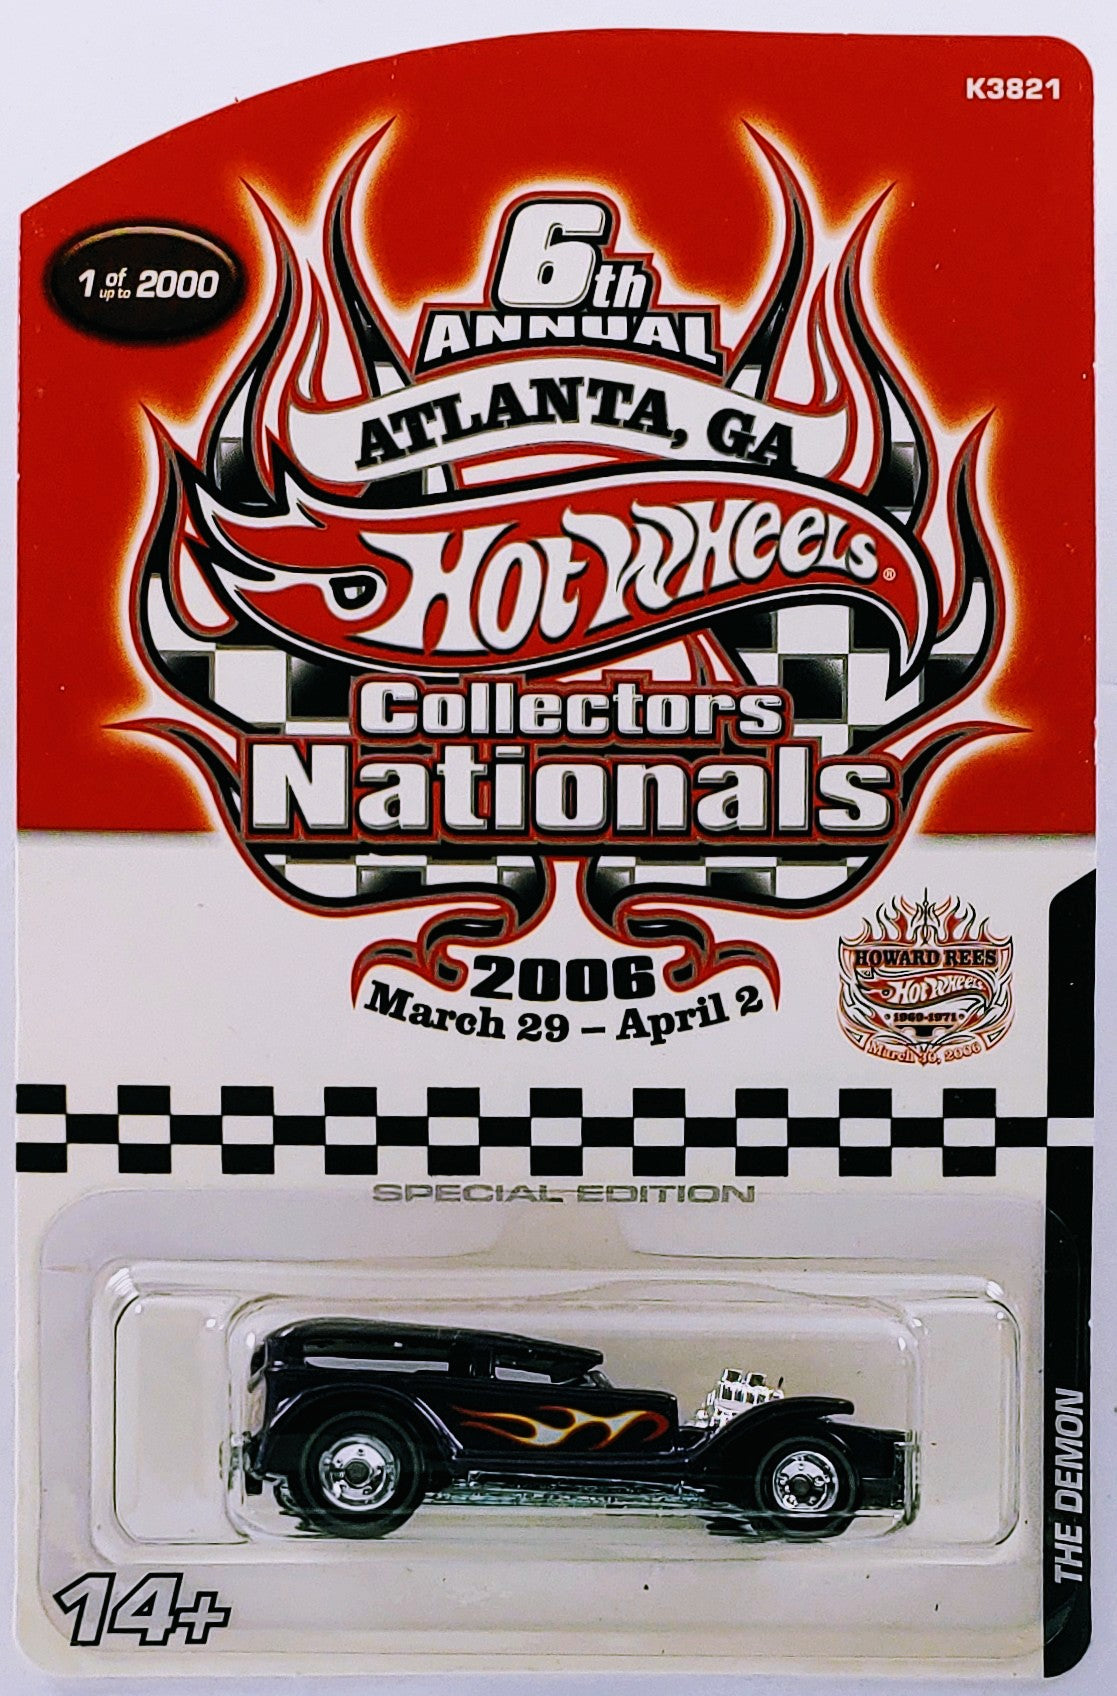 Hot Wheels 2006 - 6th Annual Collectors Nationals / Alanta, GA / Dinner Car - The Demon - Metalflake Purple with Flames - Metal/Metal & Real Riders - Limited to 2,000 - Kar Keeper